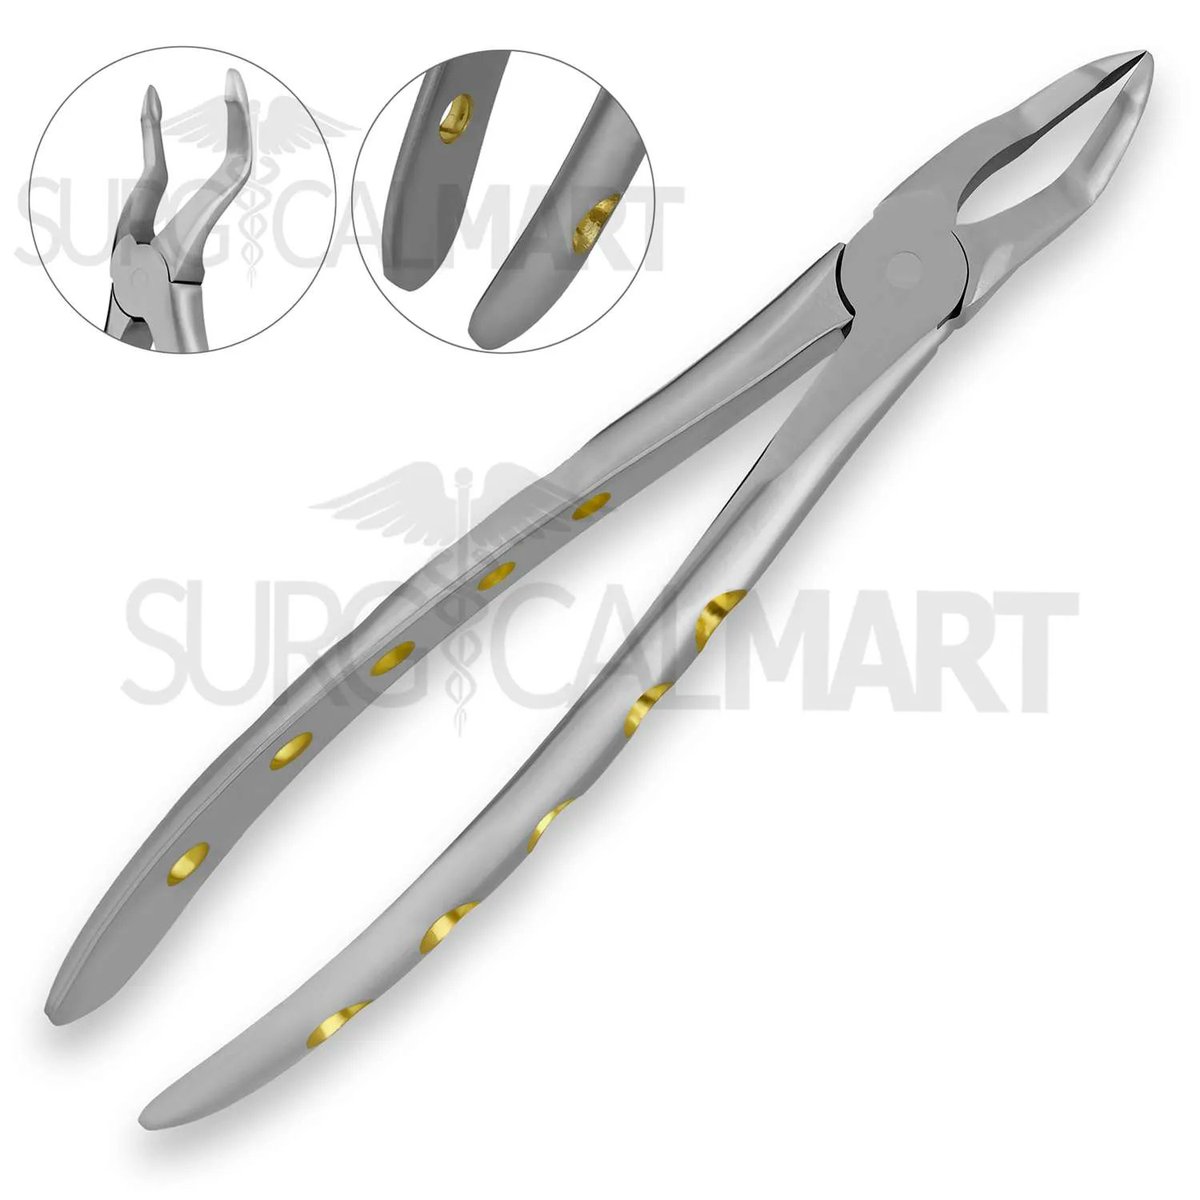 ⚡English Pattern #DentalExtractingForceps No. 51Z Upper Roots with Gold Hollow Python Grip Handle🦷
Order now 👉surgicalmart.com/shop/dental-in…
.
.
.
#surgicalmart #extractionforcep51Z #englishextractingforceps #toothextraction #dentaltools #dentalsurgery #dentalforceps #shoponline